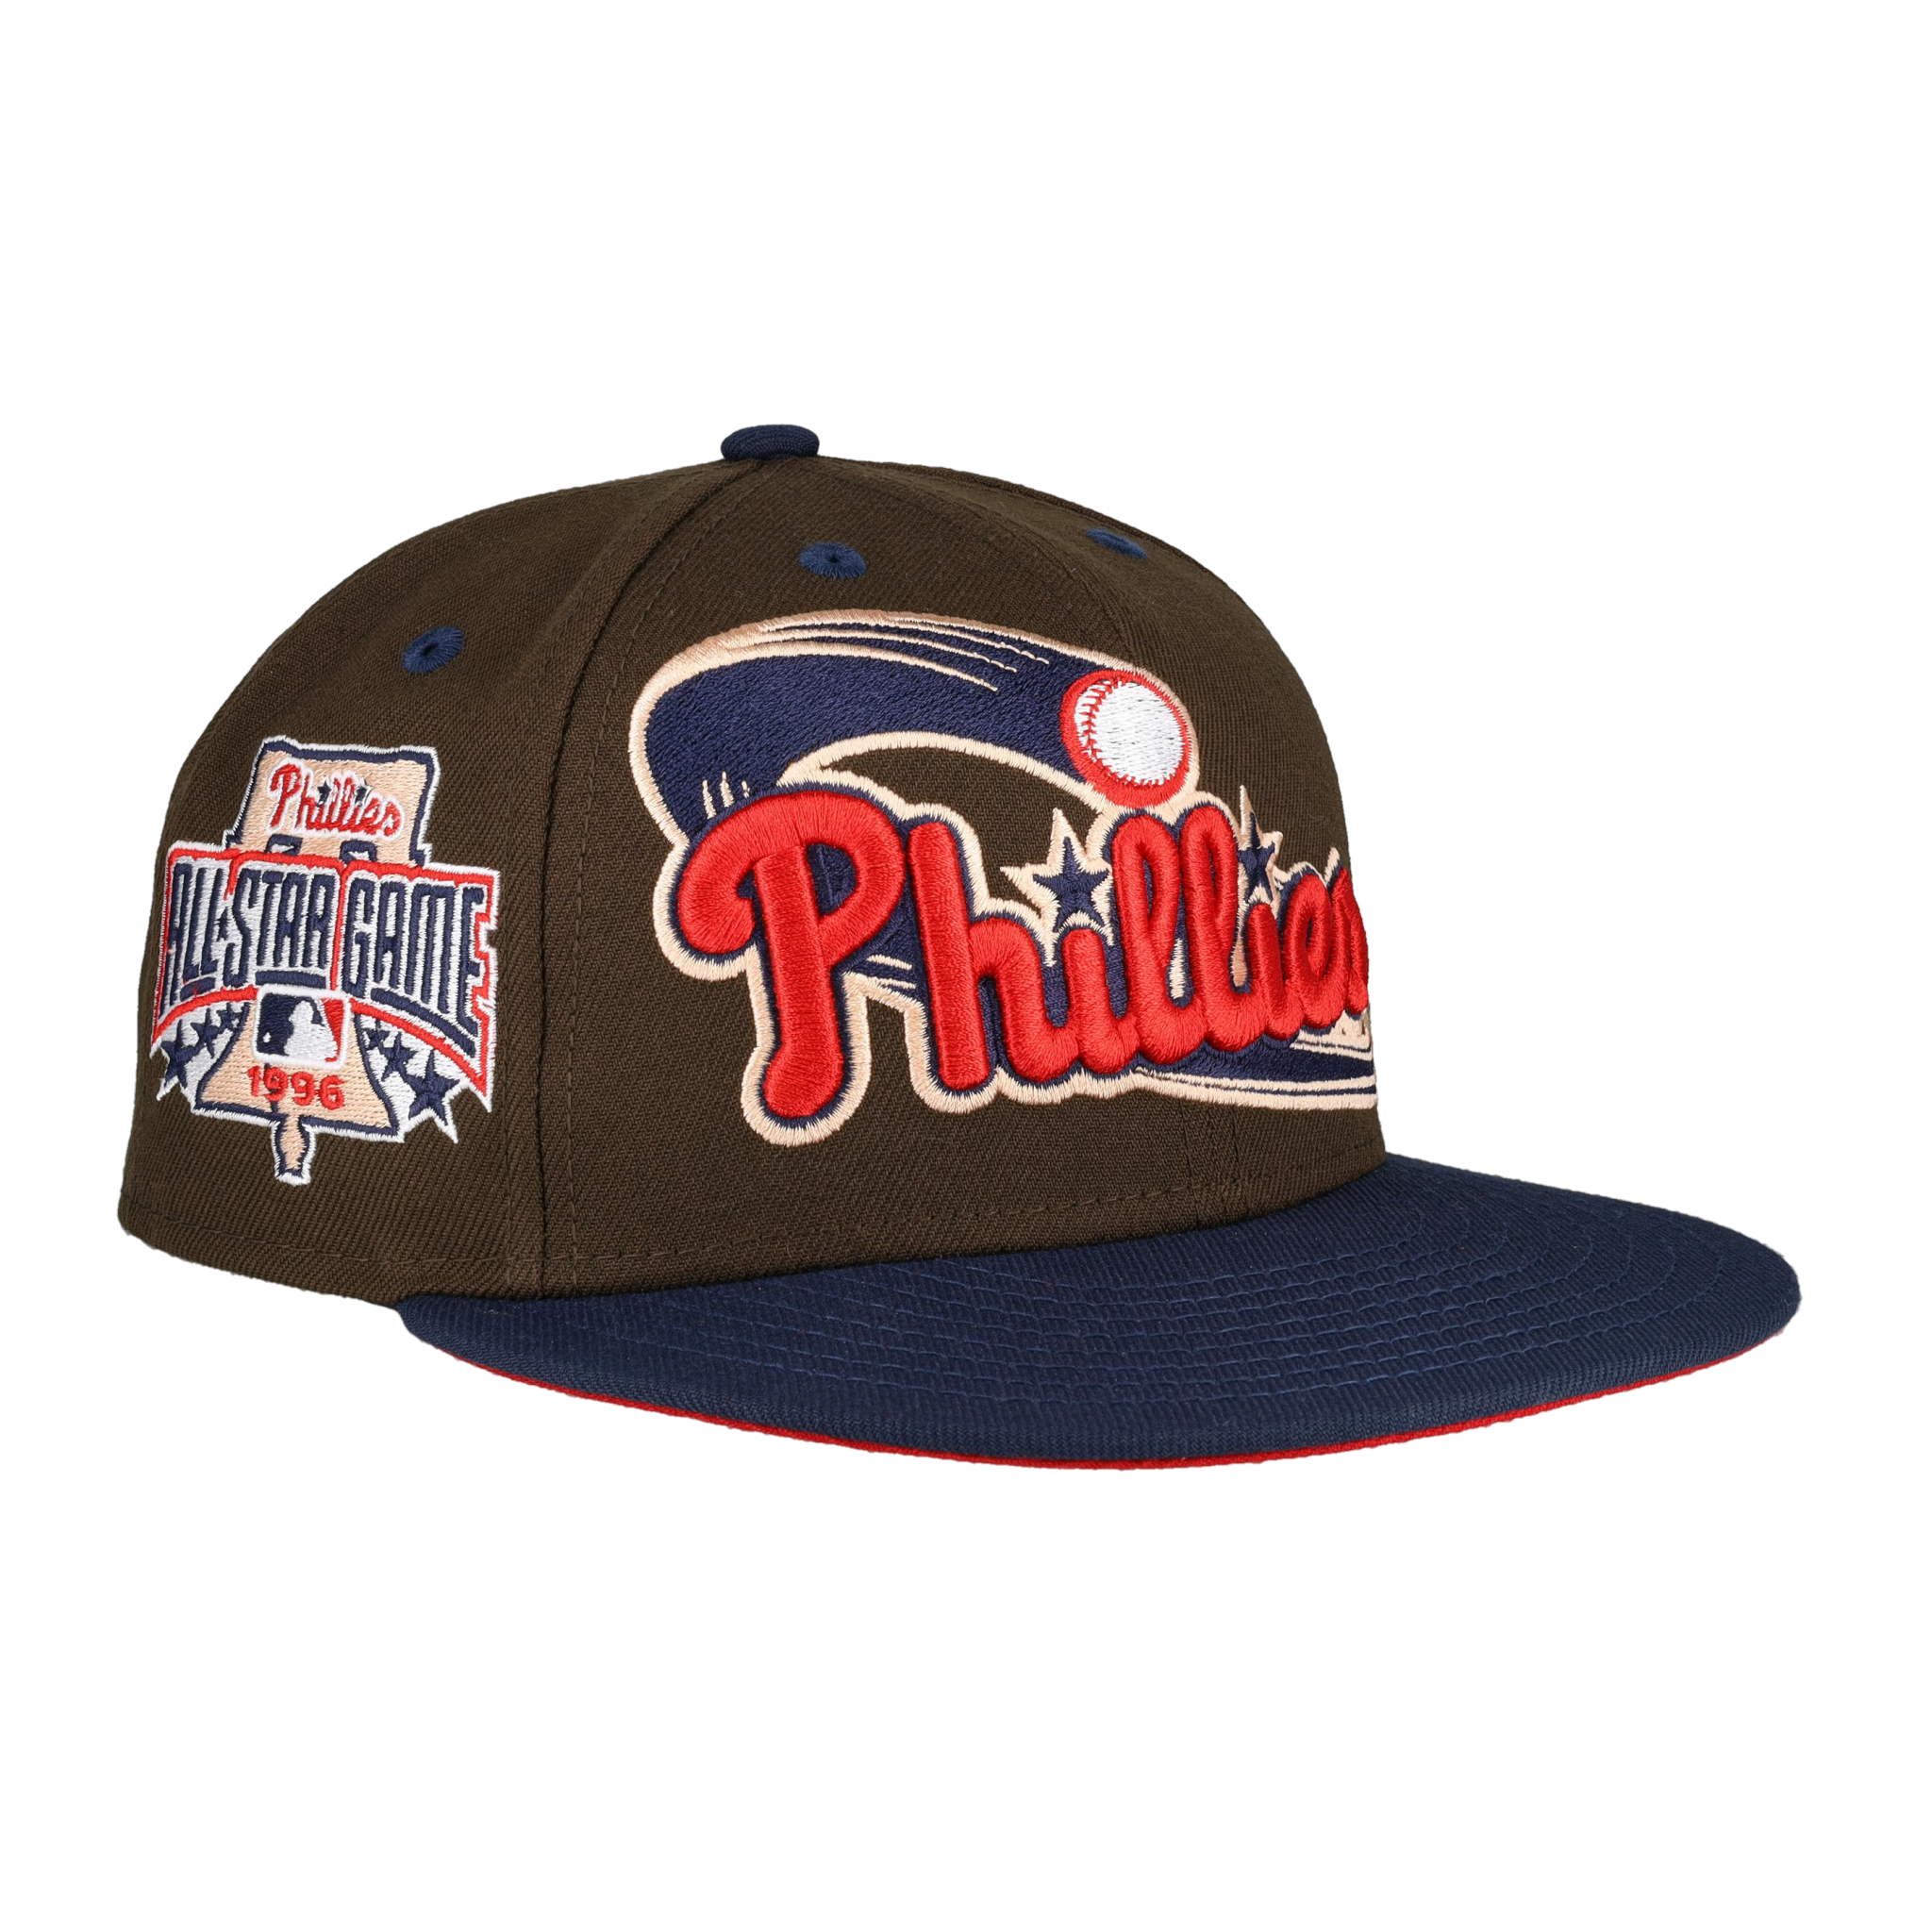 phillies hat png